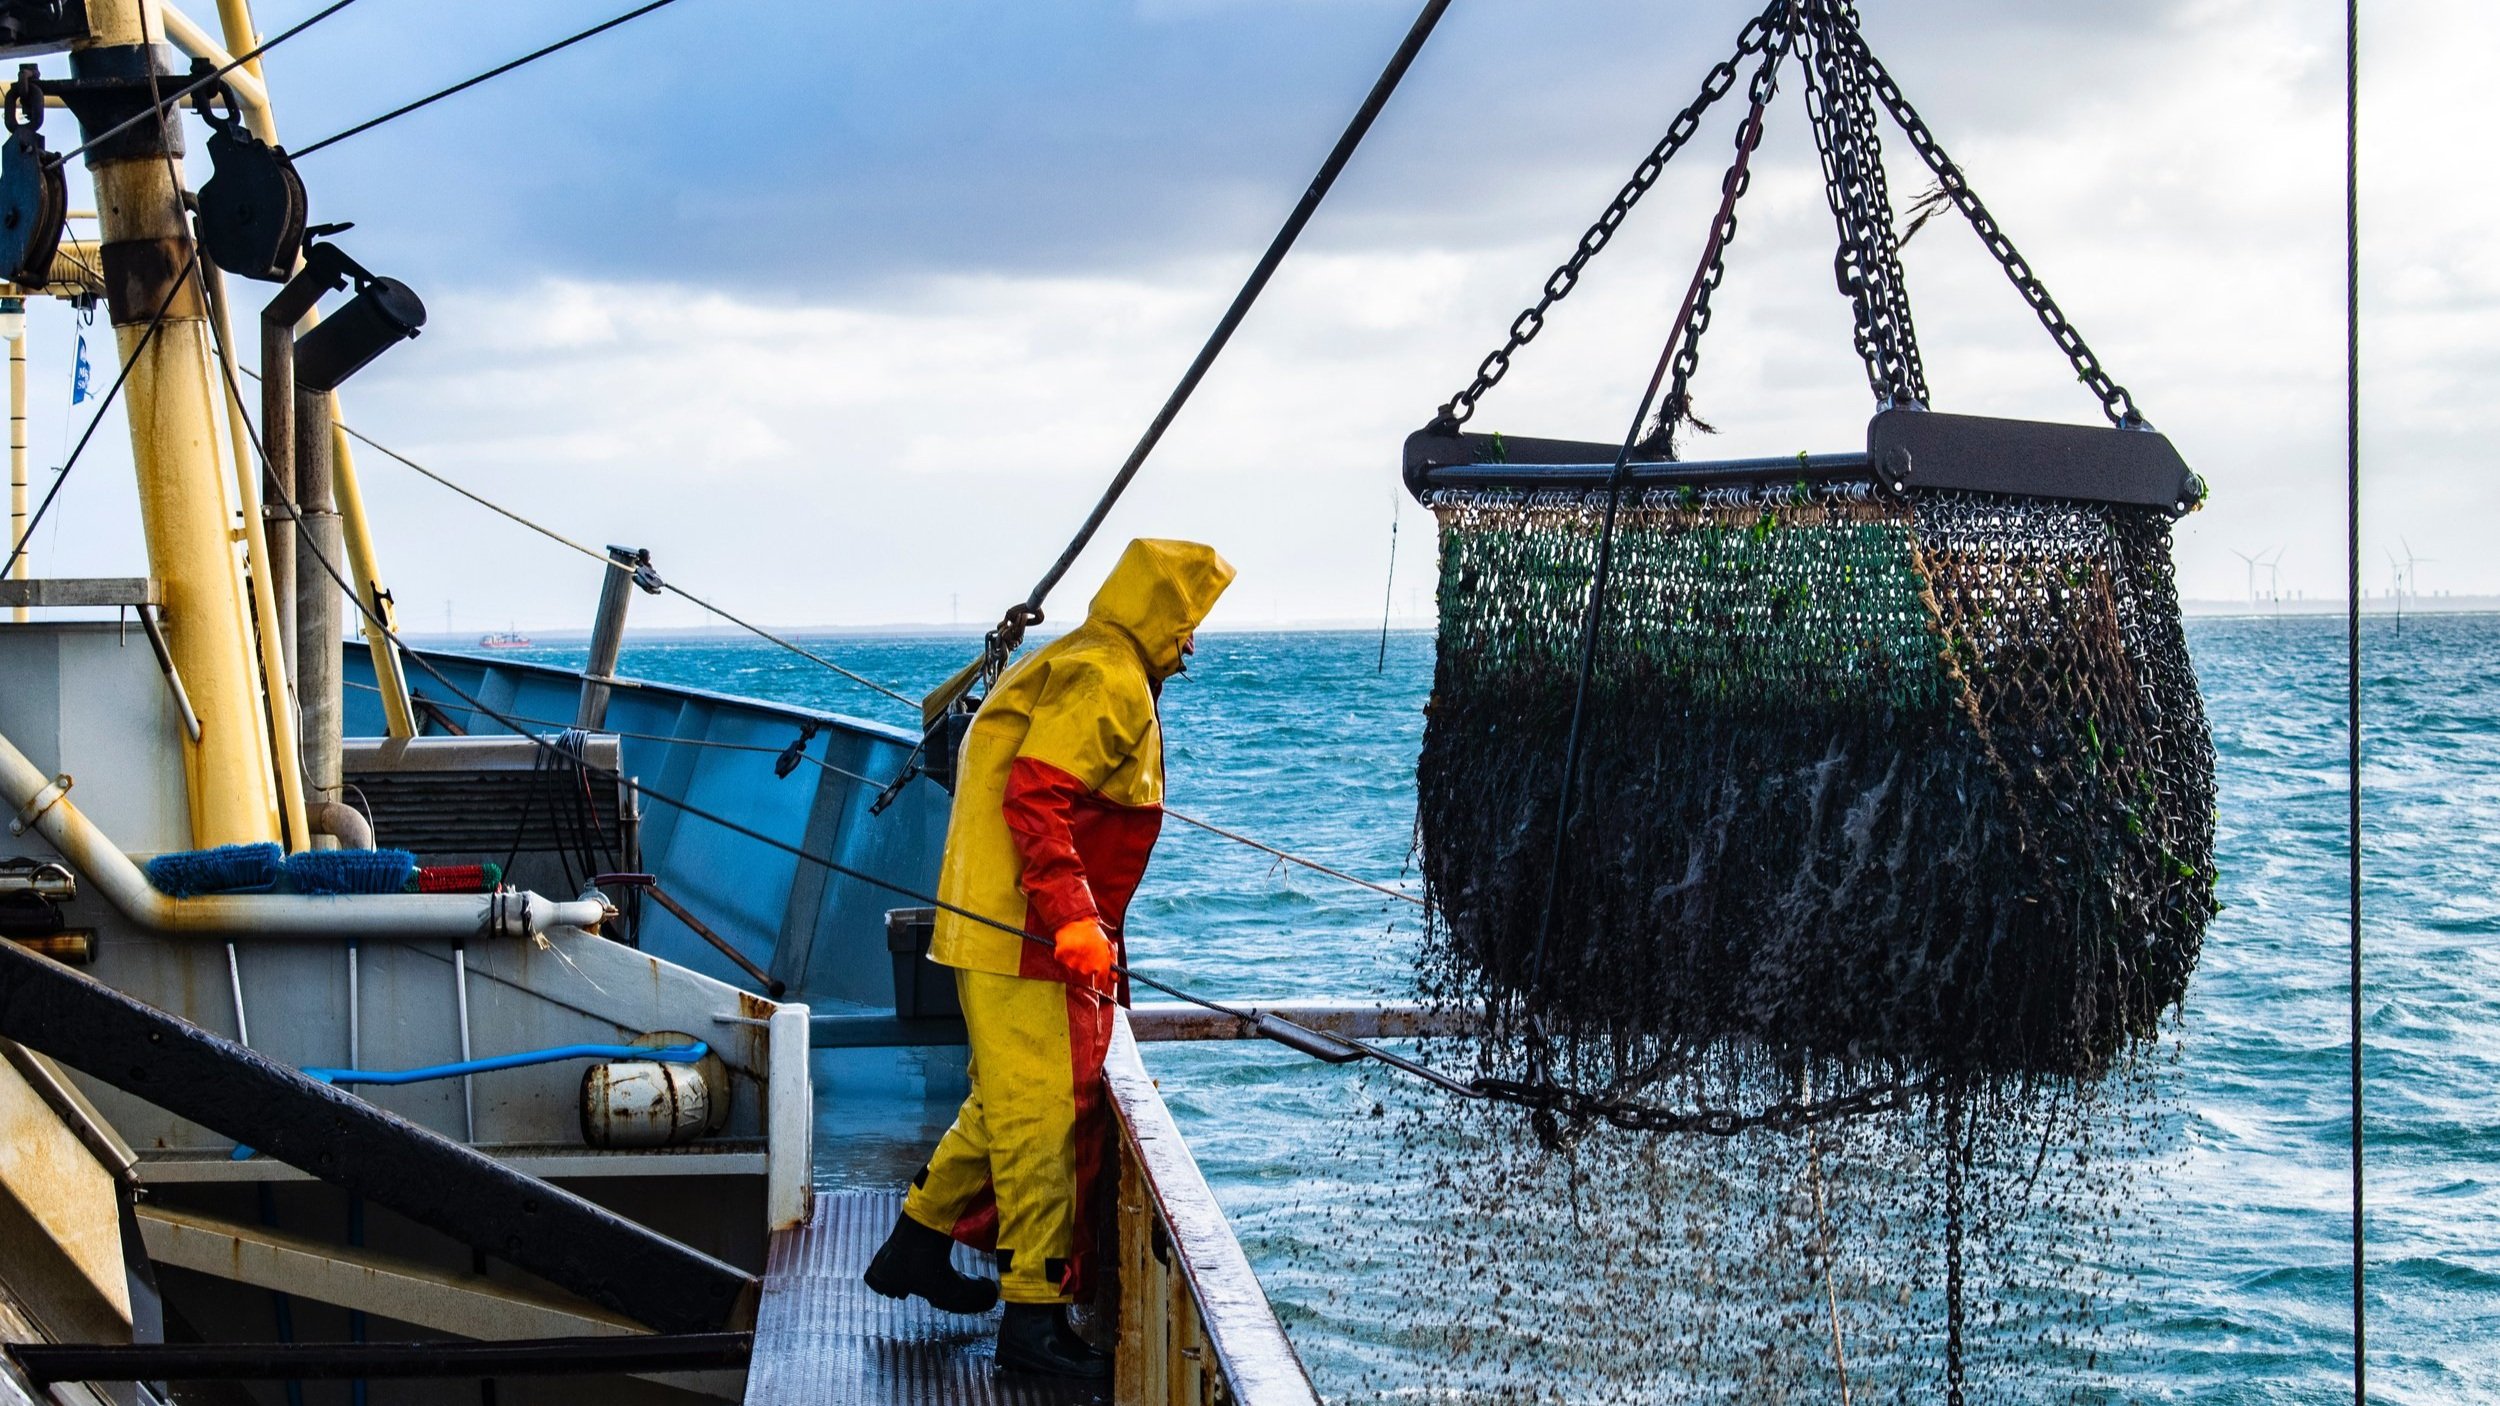 RyeStrategy - The Fishing Industry's High Tech Transition to Sustainability